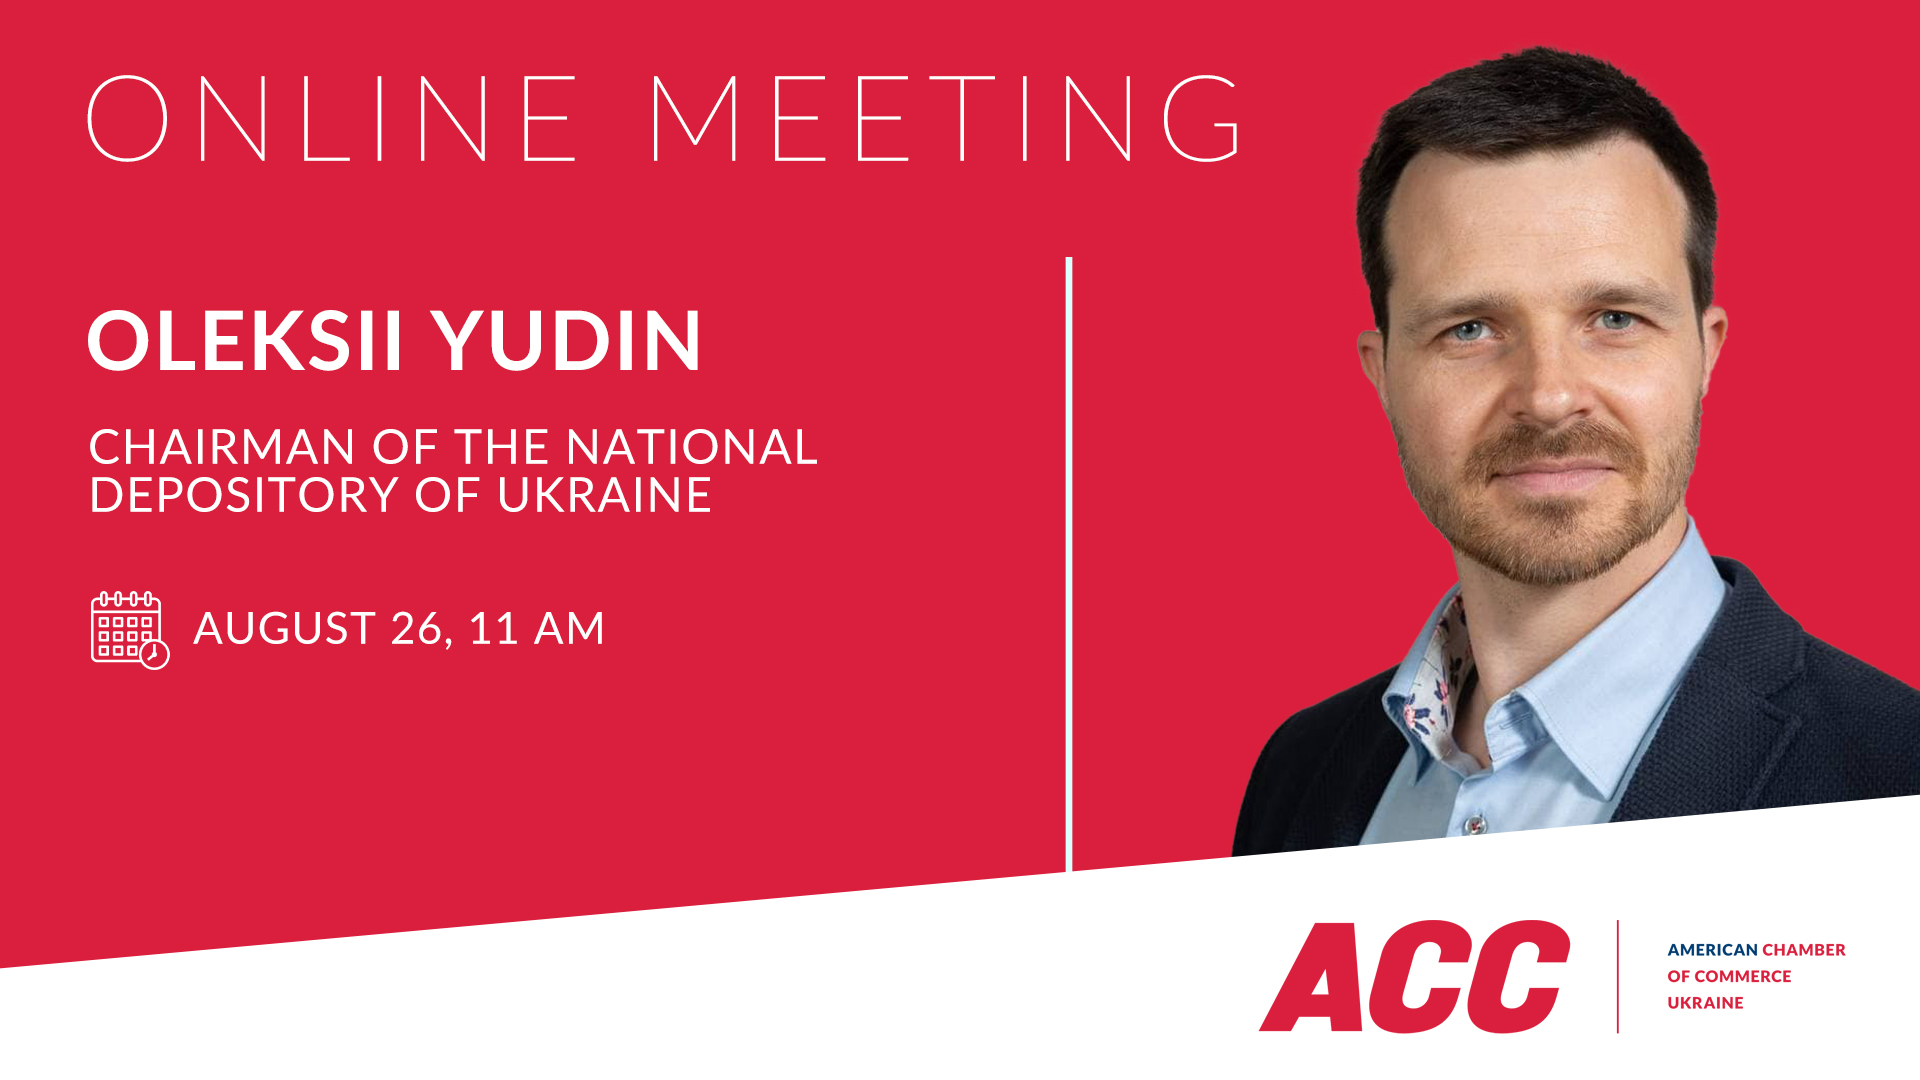 Online Meeting with Oleksii Yudin, Chairman of the National Depository of Ukraine